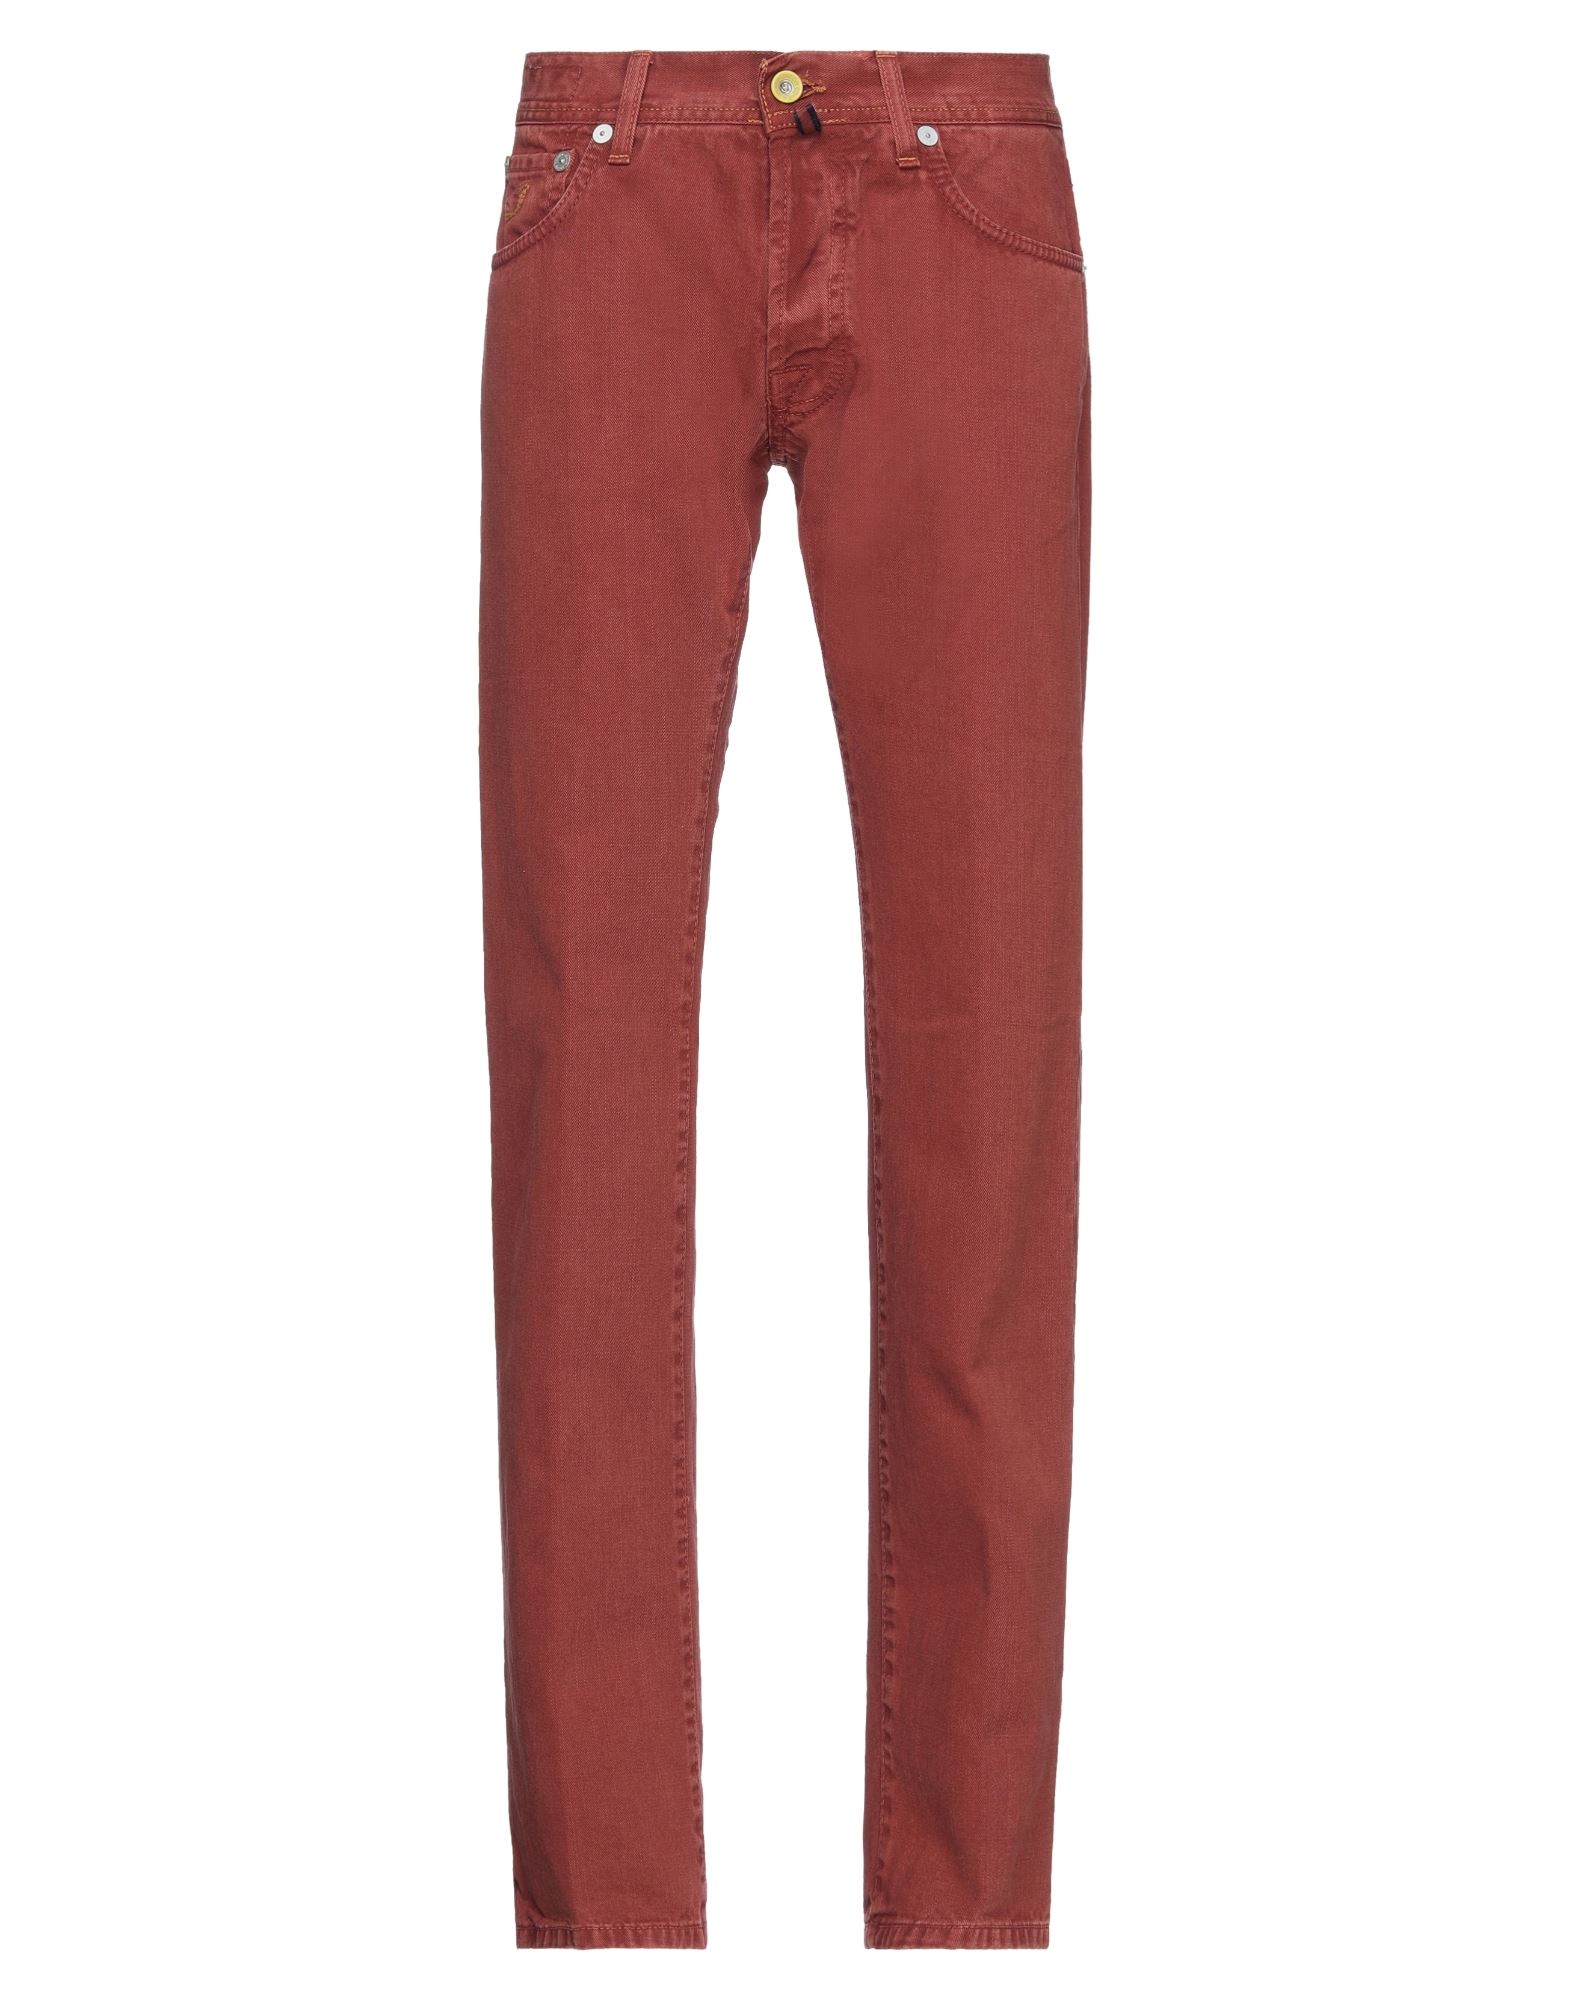 Jacob Cohёn Jeans In Rust